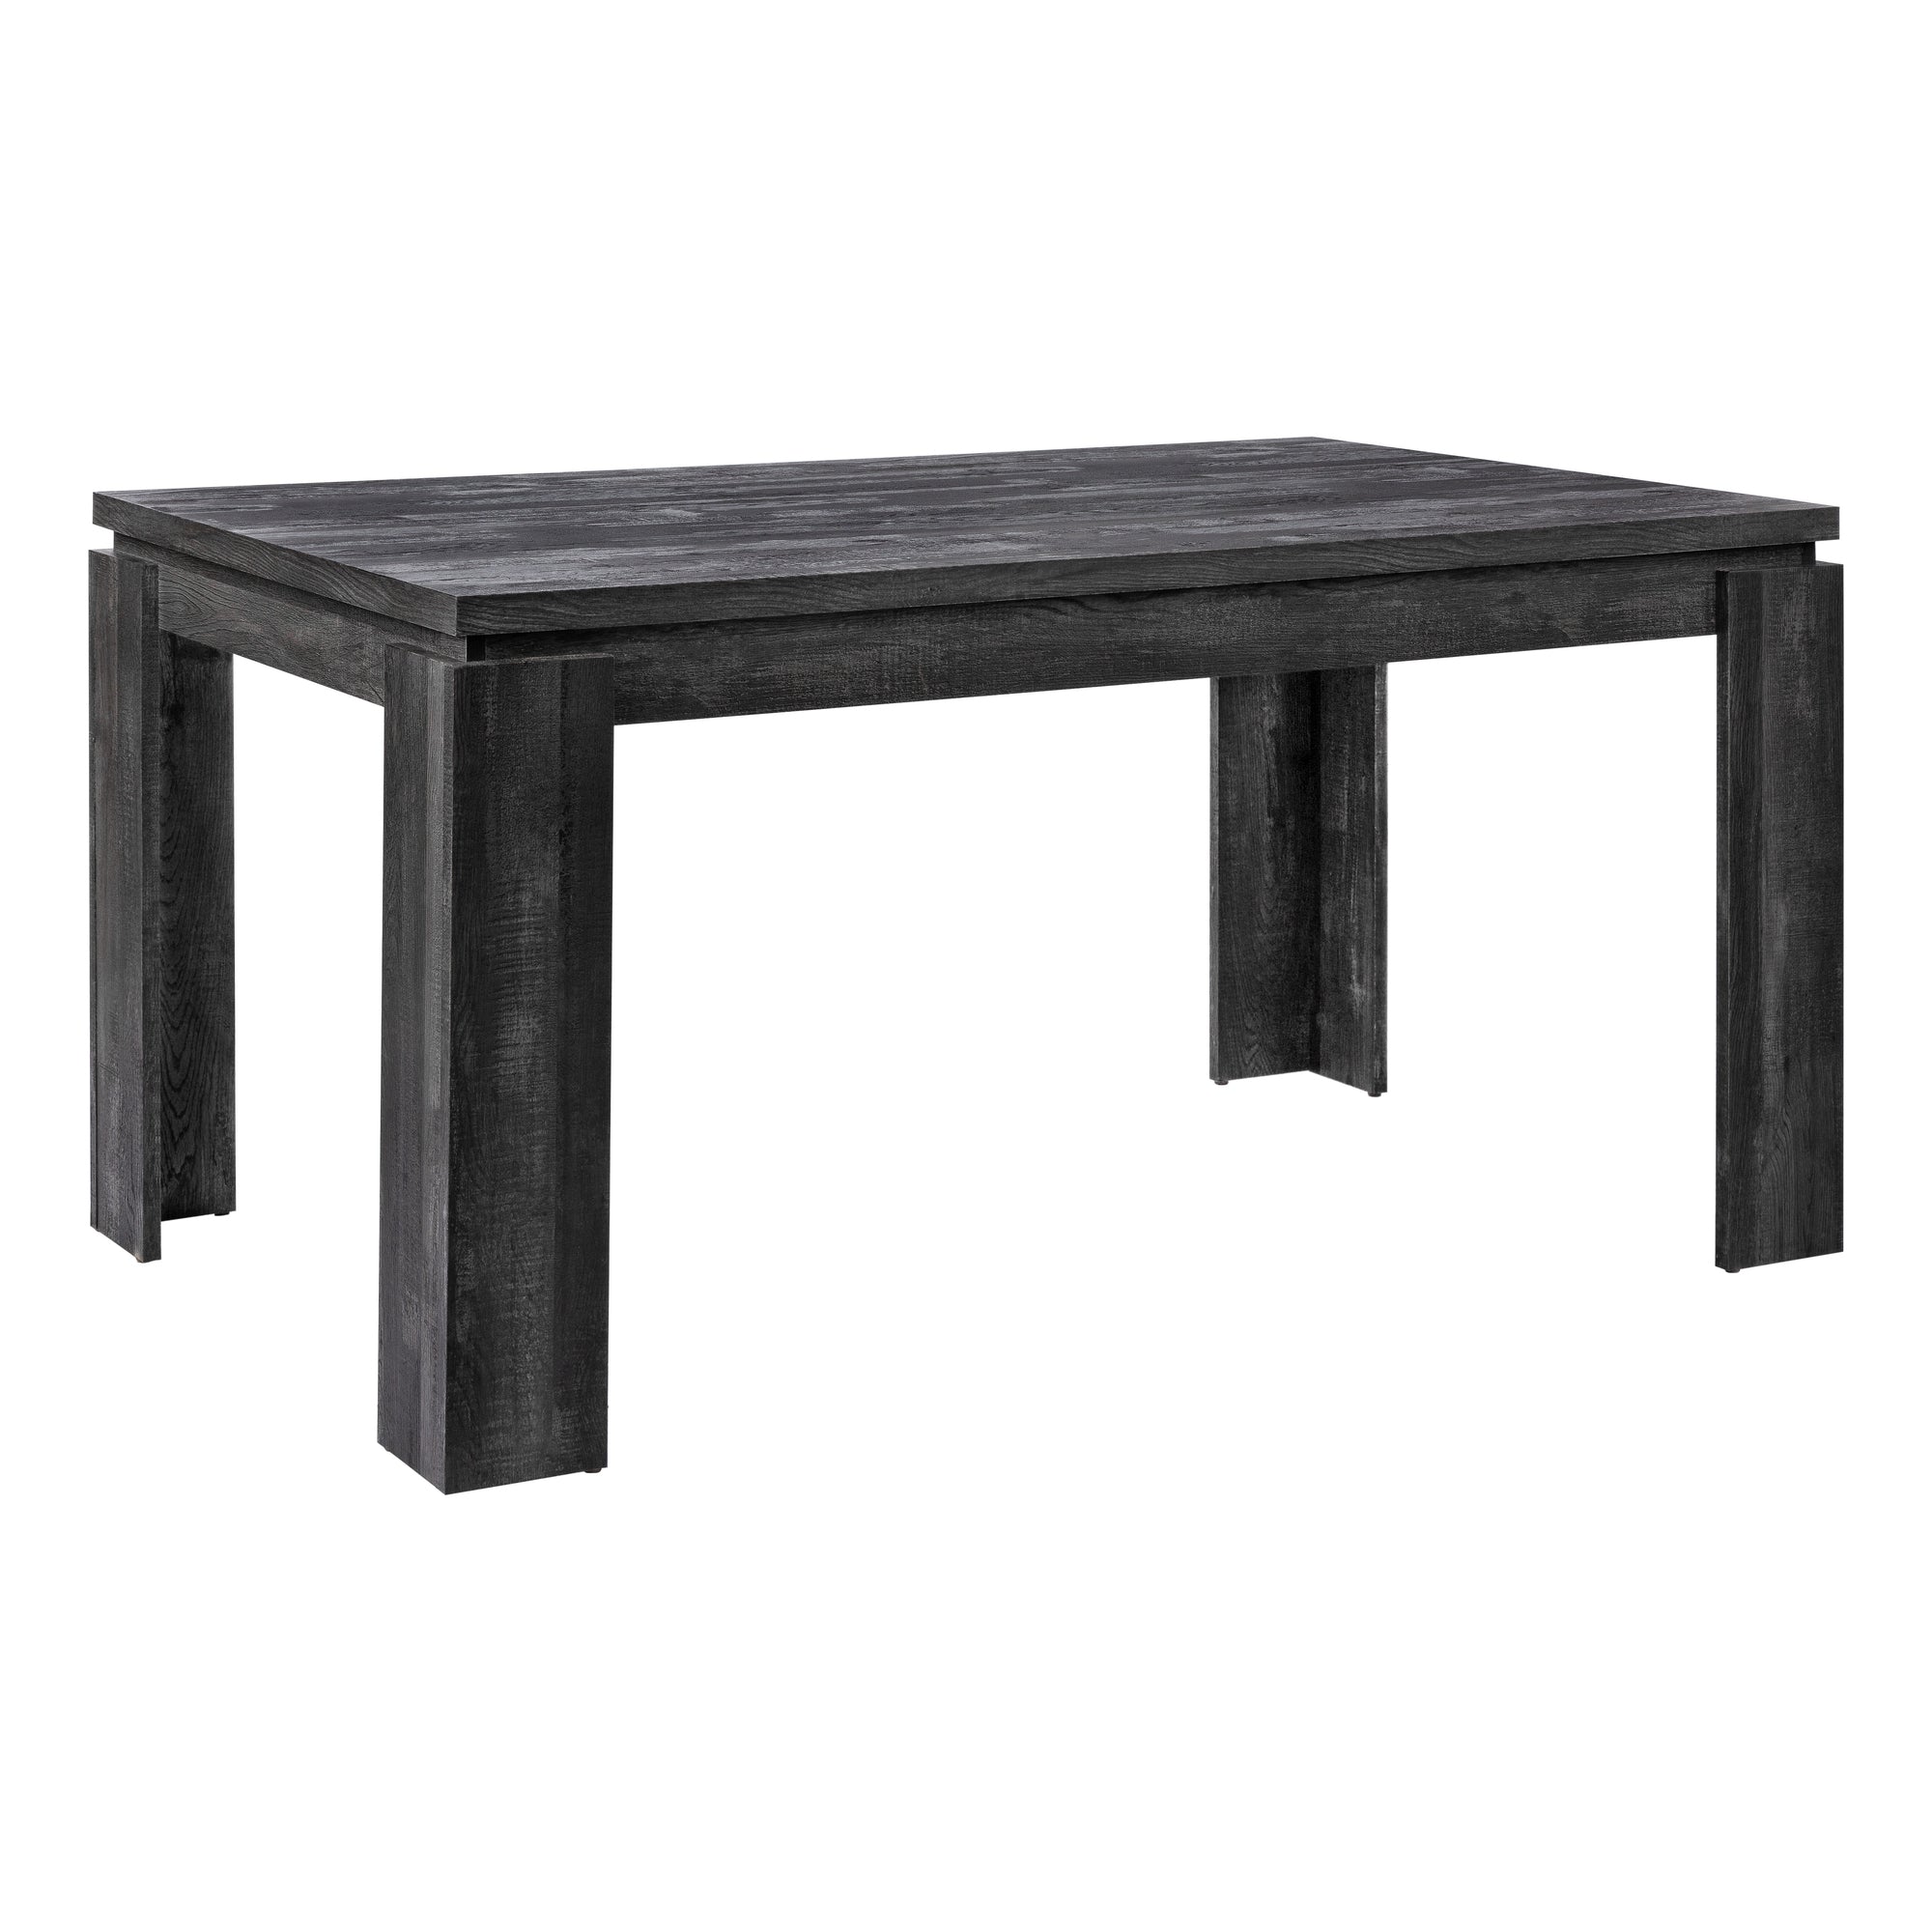 MN-451089    Dining Table, 60" Rectangular, Kitchen, Dining Room, Laminate, Black Reclaimed Wood Look, Contemporary, Modern